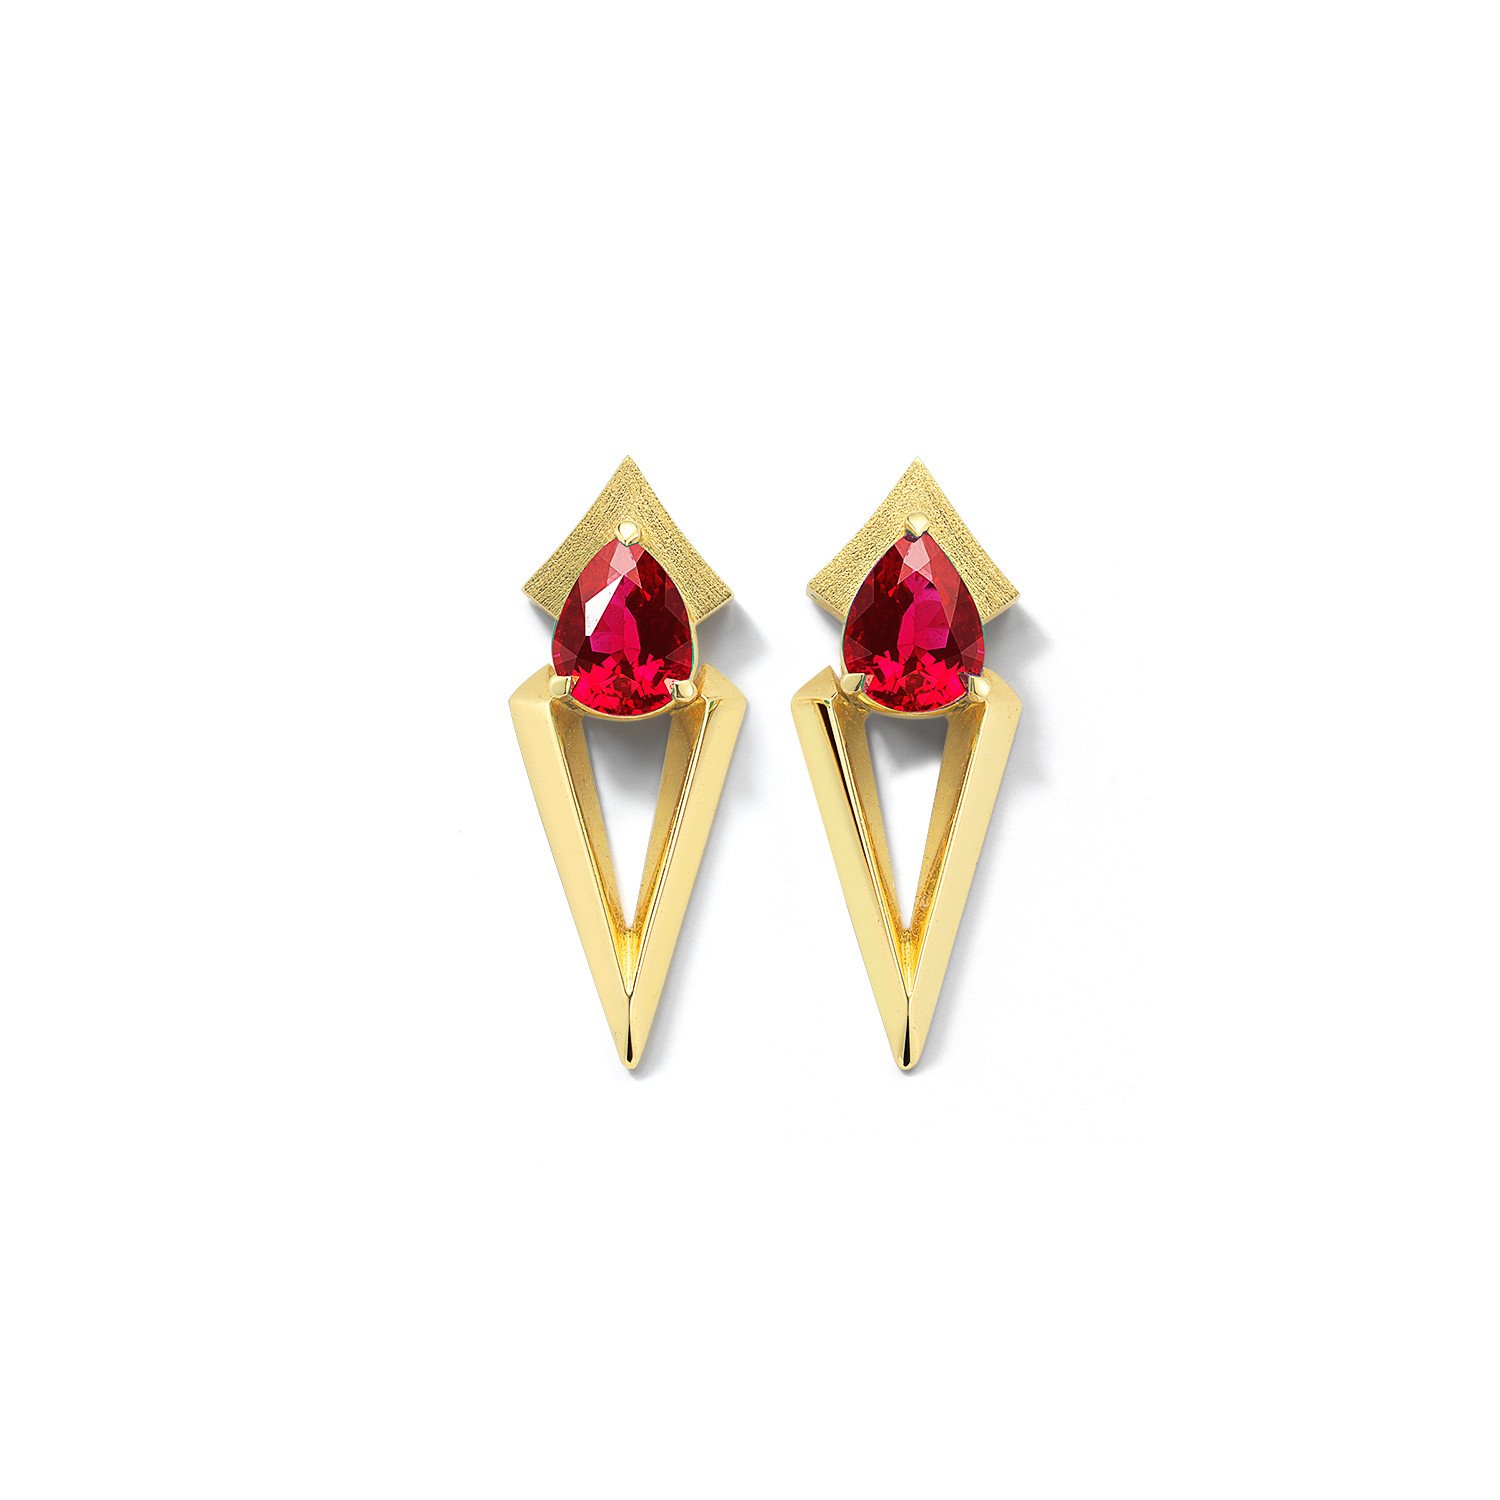 Arris Ruby Drop Earrings by Valani Atelier. 18K Yellow Gold and Rubies